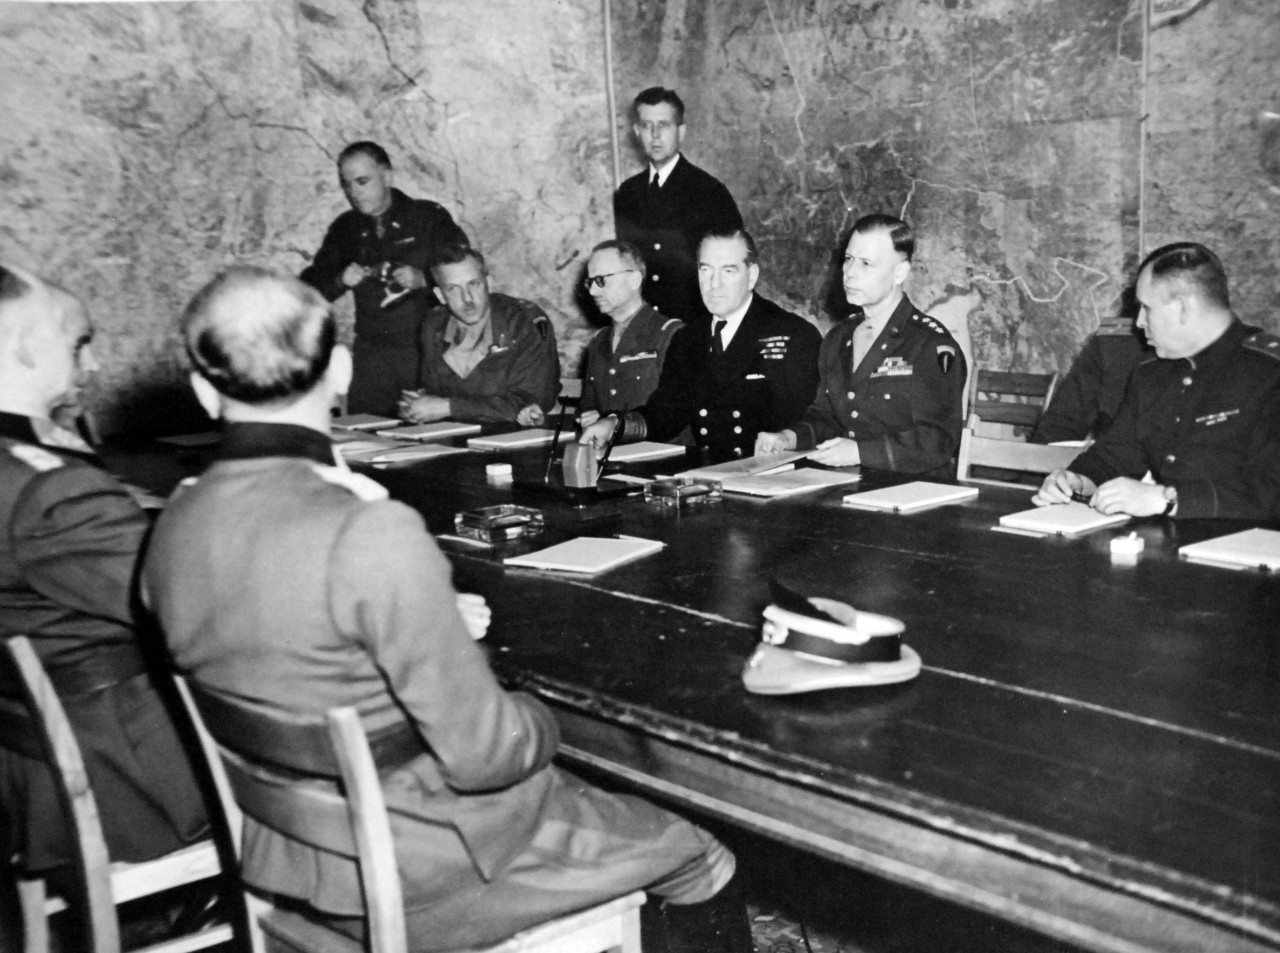 111-SC-27266: Surrender of Germany, 7 May 1945. Terms of Unconditional Surrender are here being dictated to the Representatives of the German government in the War Room of Supreme Headquarters, Allied Expeditionary Forces (SHAEF), at Reims, France.  In the picture, backs to camera, are Major Wilhelm Oxenius, of the German General Staff; (nearest camera) Colonel General Gustaf Jodl, German Chief of Staff; General Admiral Von Friedburg, of the German Navy, facing the camera on the far side of the table, seated are (left to right) Lieutenant General Sir F. E. Morgan, Deputy Chief of Staff; General Francois Sevez, Representative of General Alphonse Juin, French Chief of Staff; Admiral Harold M. Burrough, Commander in Chief, Allied Naval Expeditionary Forces; Lieutenant General W.B. Smith, Chief of Staff, SHAEF; and Major General of Artillery Ivan Alexeyevich Susloparov, Russian Representative.  Standing behind General Sevez is Captain H.C. Butcher, Naval Aide to General Eisenhower.  U.S. Army Photograph. Courtesy of the Library of Congress Collection, Lot-8988. (2015/10/16).